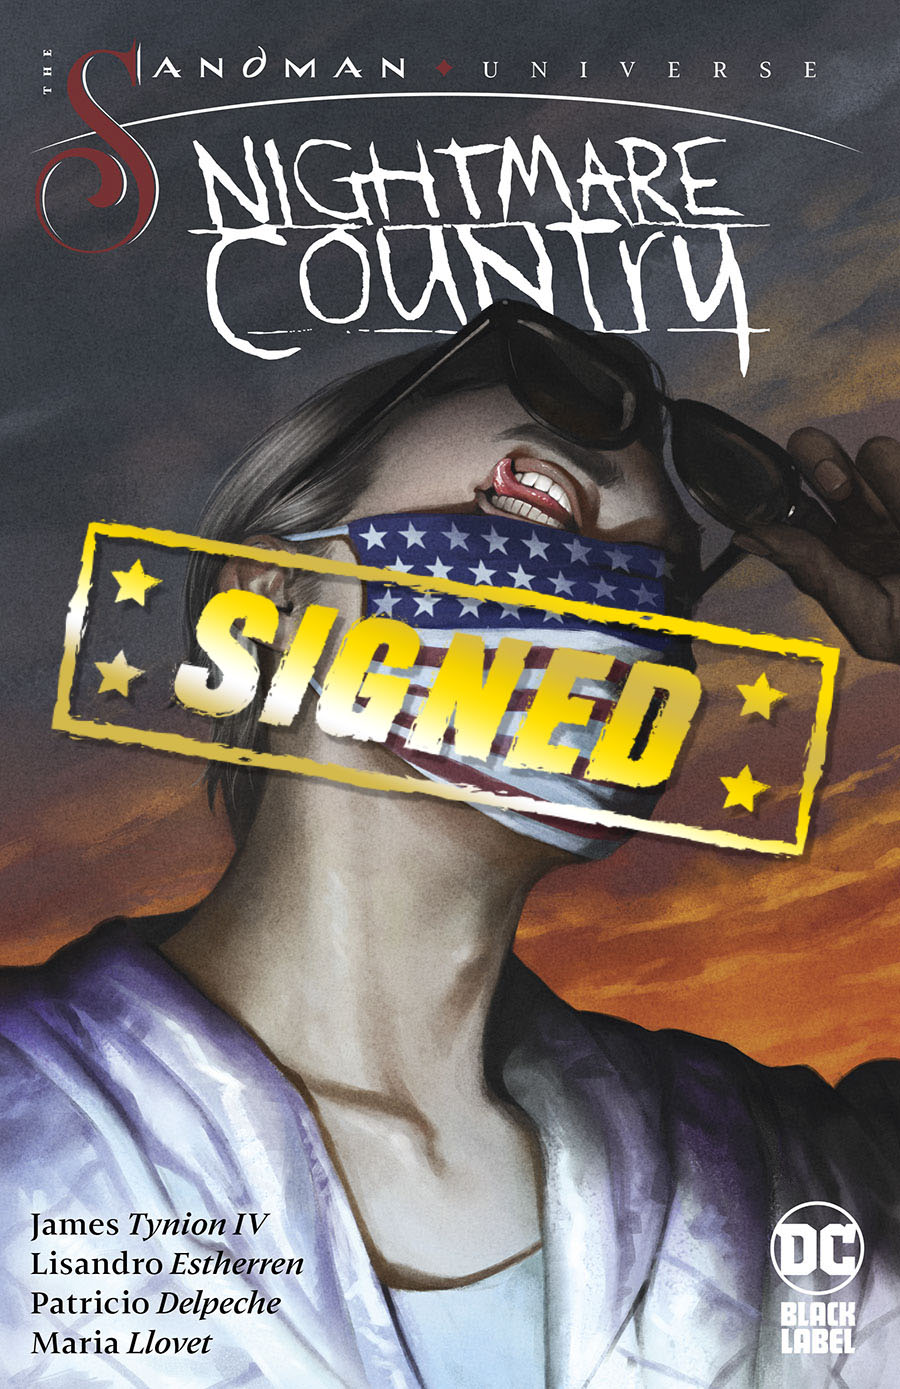 Sandman Universe Nightmare Country Vol 1 TP Direct Market Exclusive Variant Cover Signed By James Tynion IV